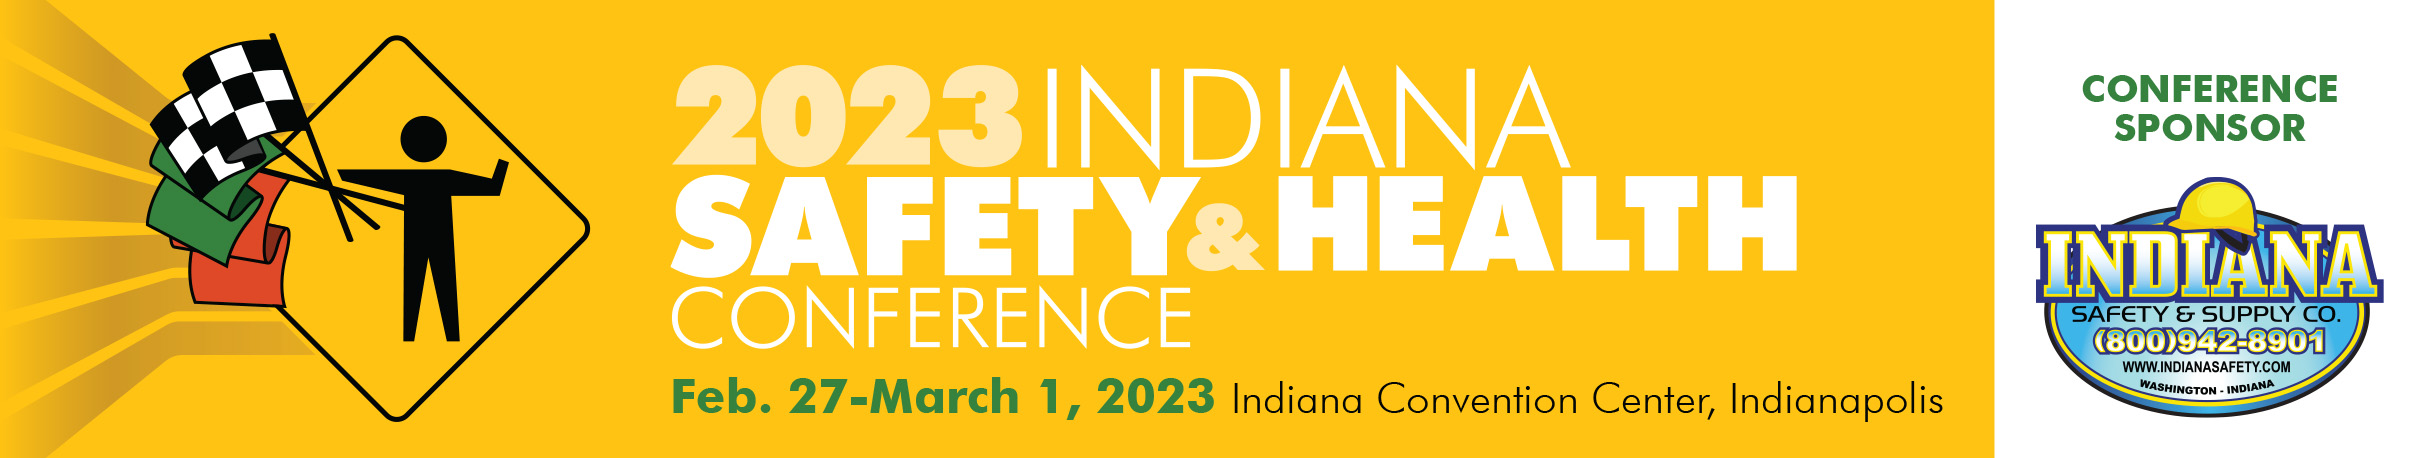 2023 Indianapolis Safety and Health Conference and Expo